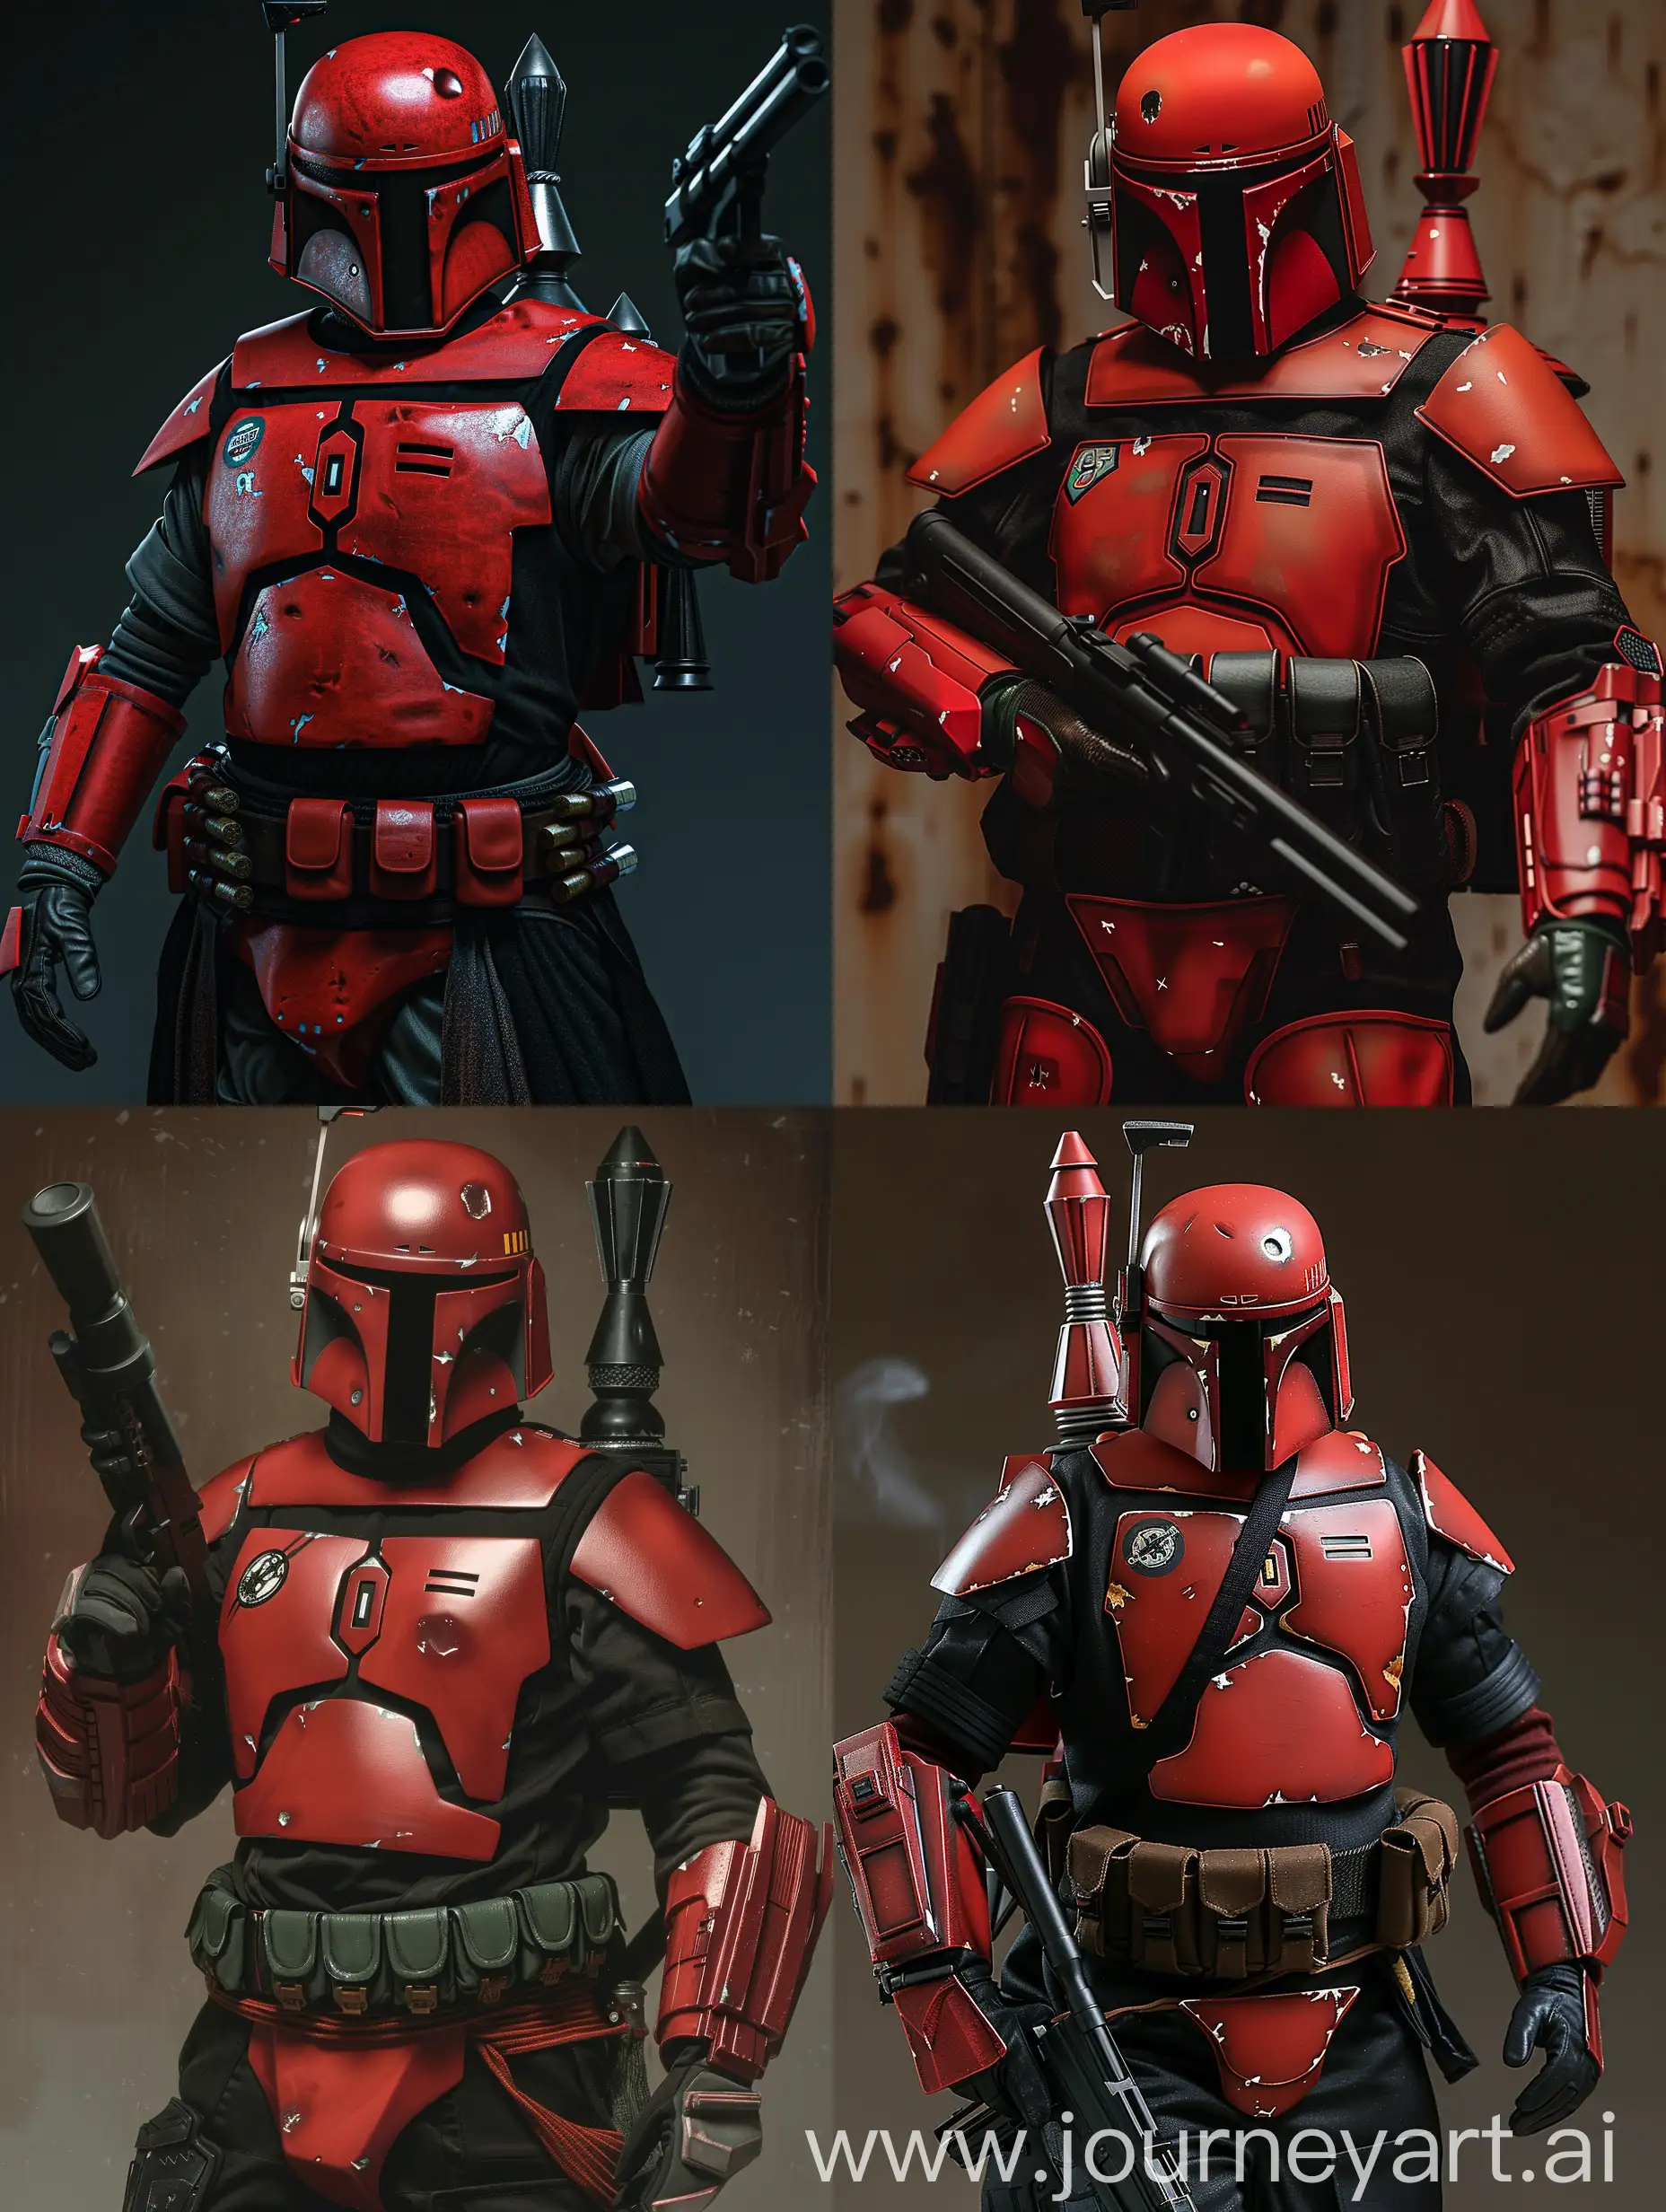 Crimson-Armored-Jango-Fett-with-Black-Accessories-and-Hyperrealistic-Star-Wars-Aesthetic